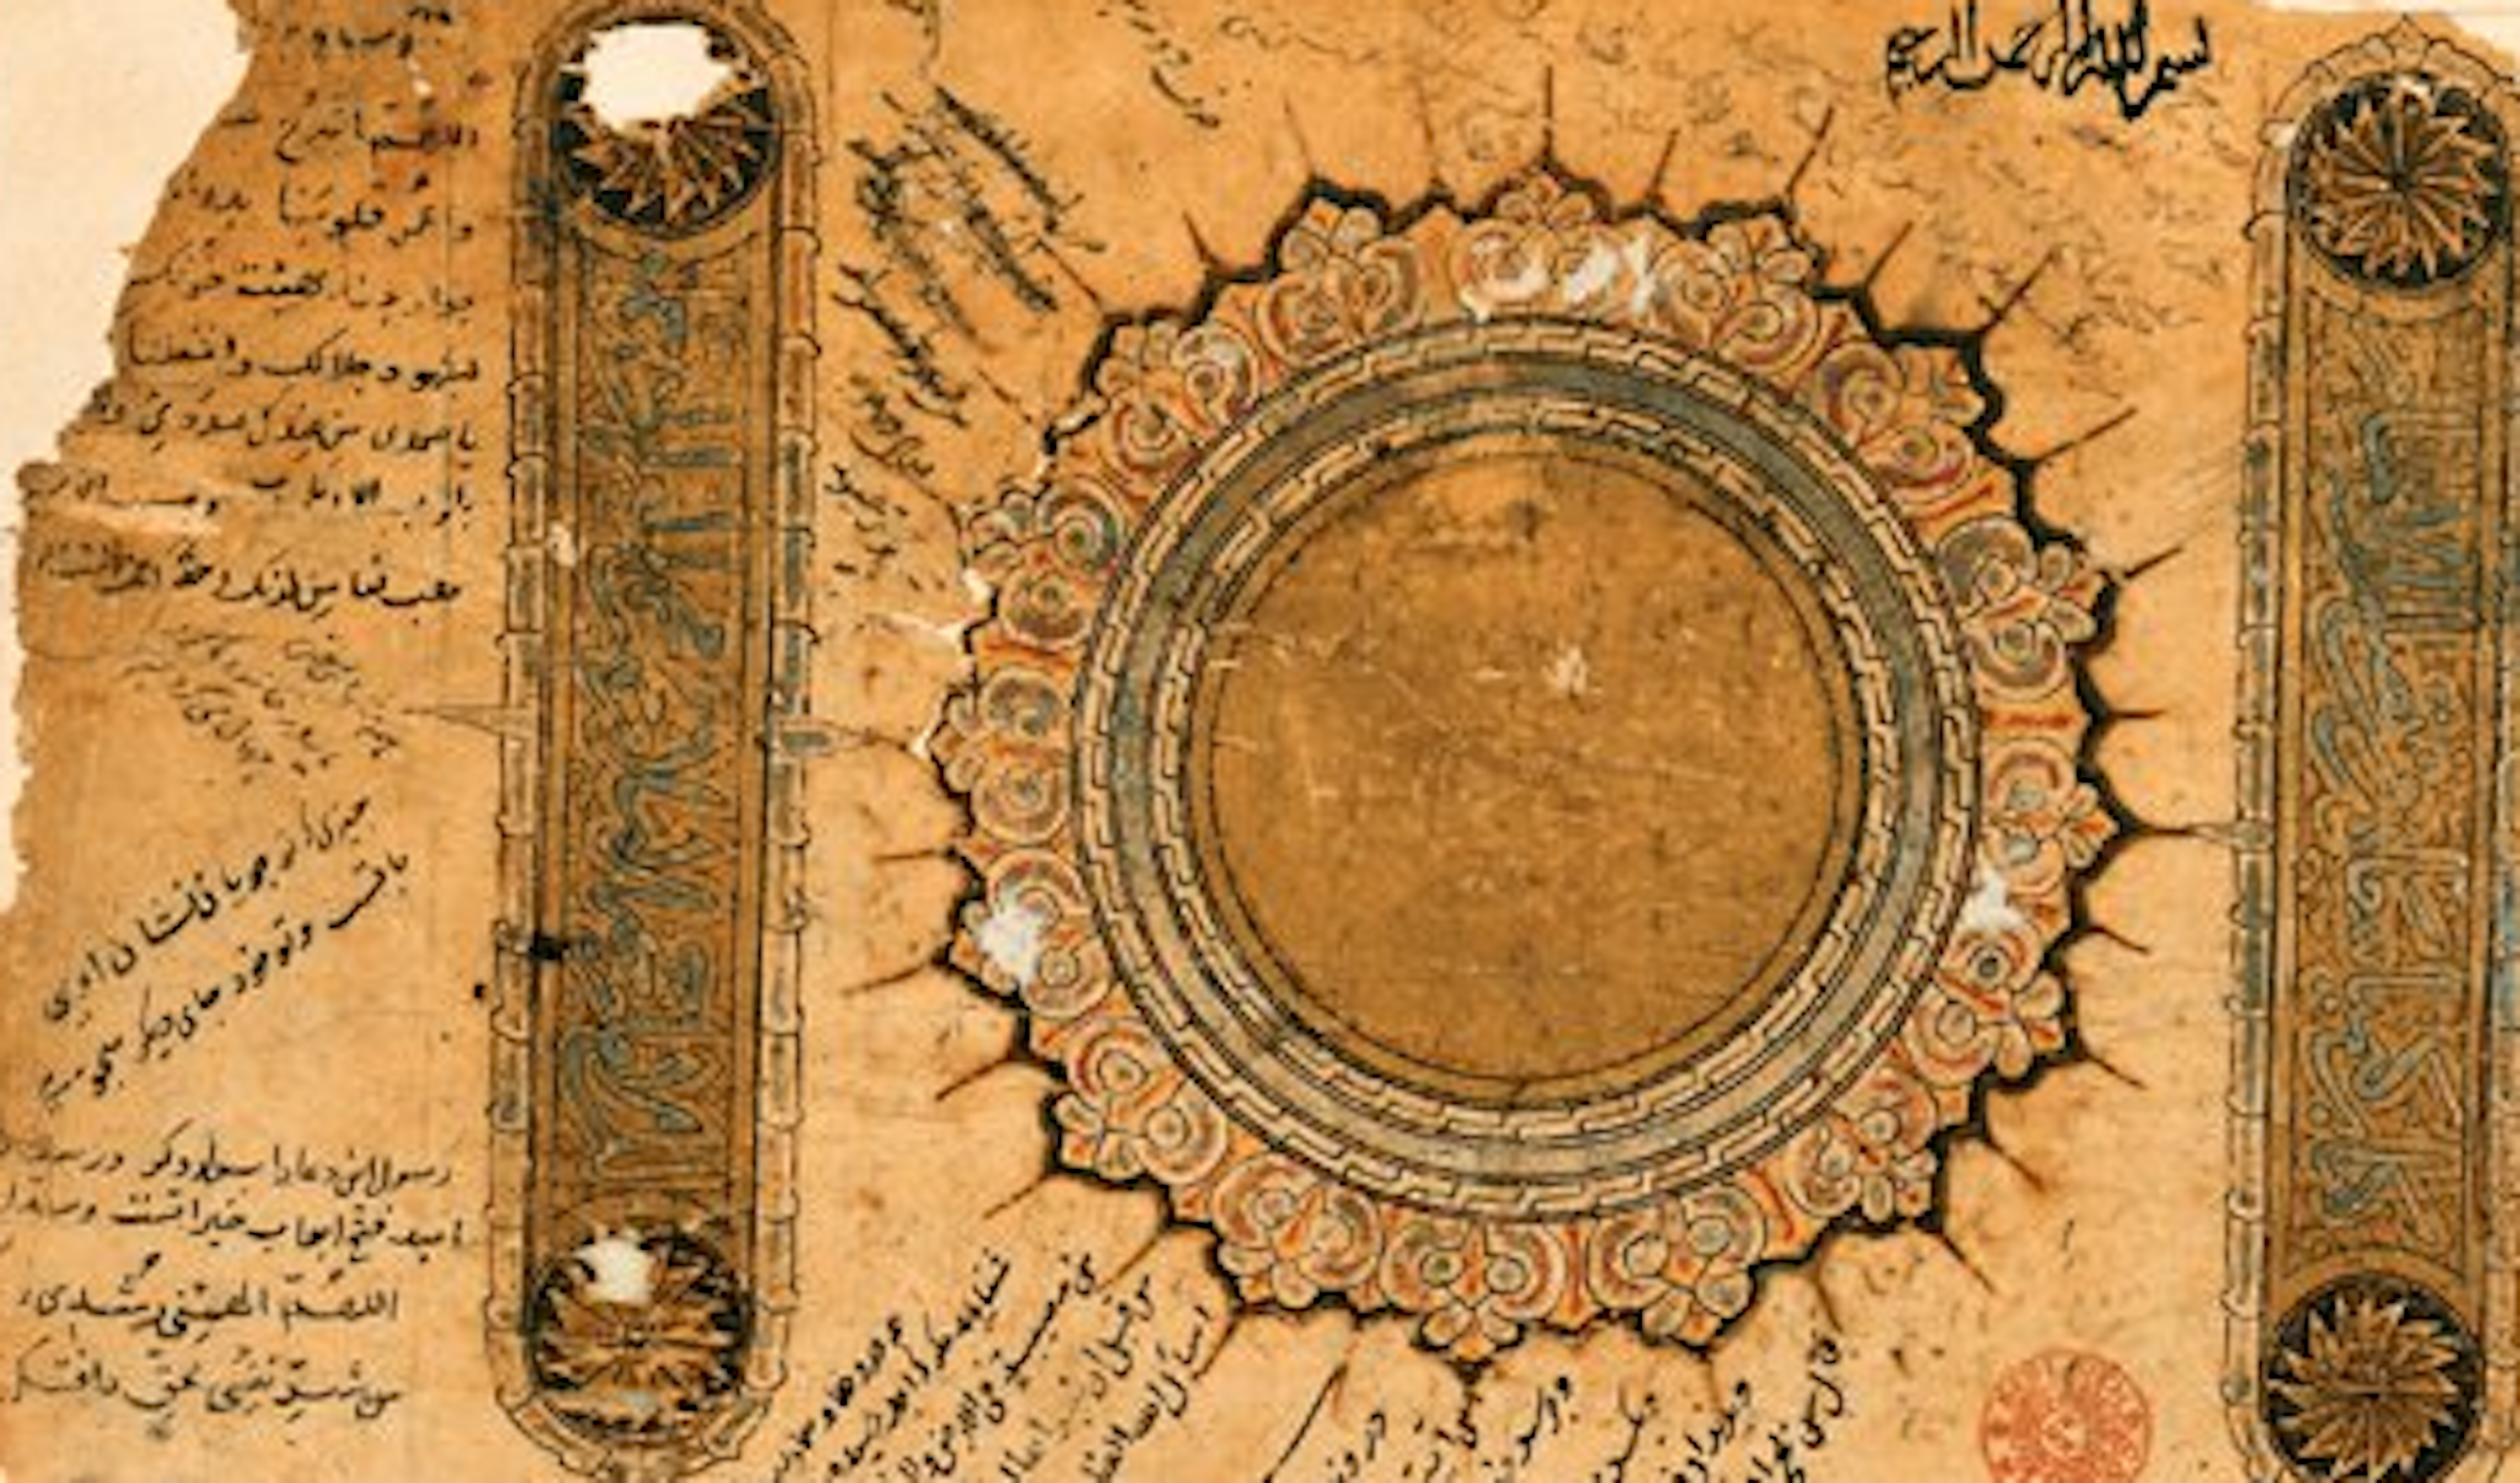 A yellowed page of a book cover with Persian inscriptions and a design with concentric circles set in the middle of two rectangular bars with intricate art.